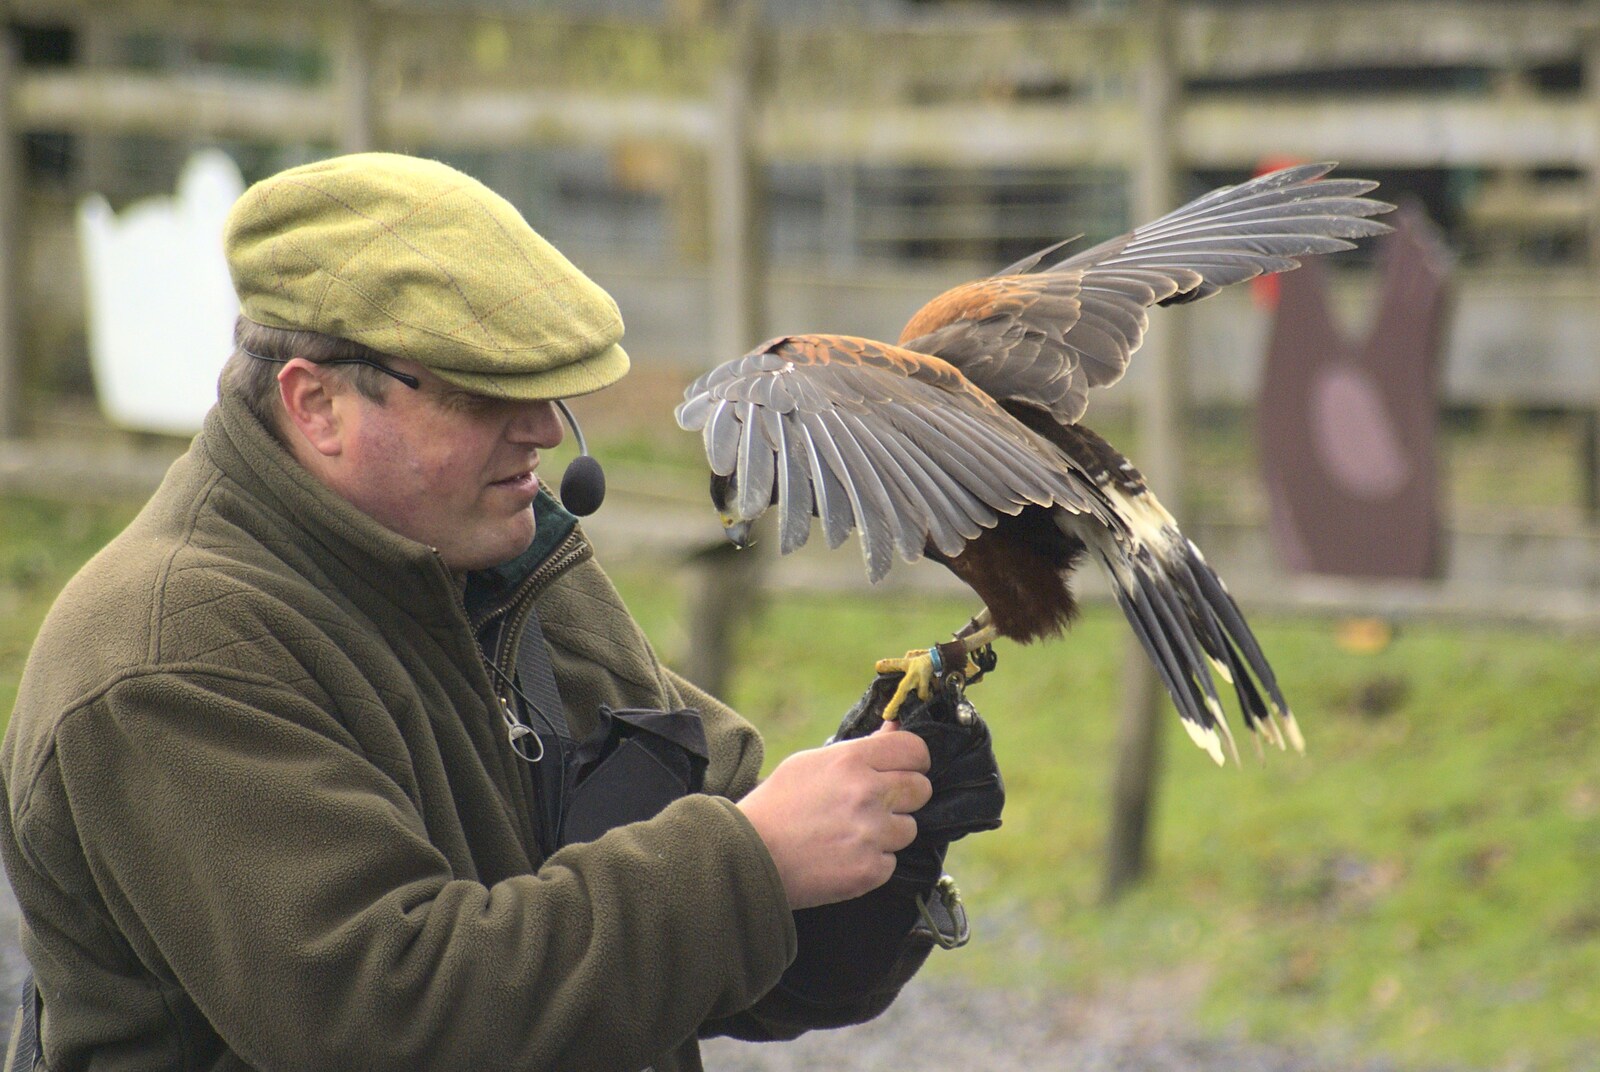 A bloke with a kestrel from Easter in Chagford and Hoo Meavy, Devon - 3rd April 2010